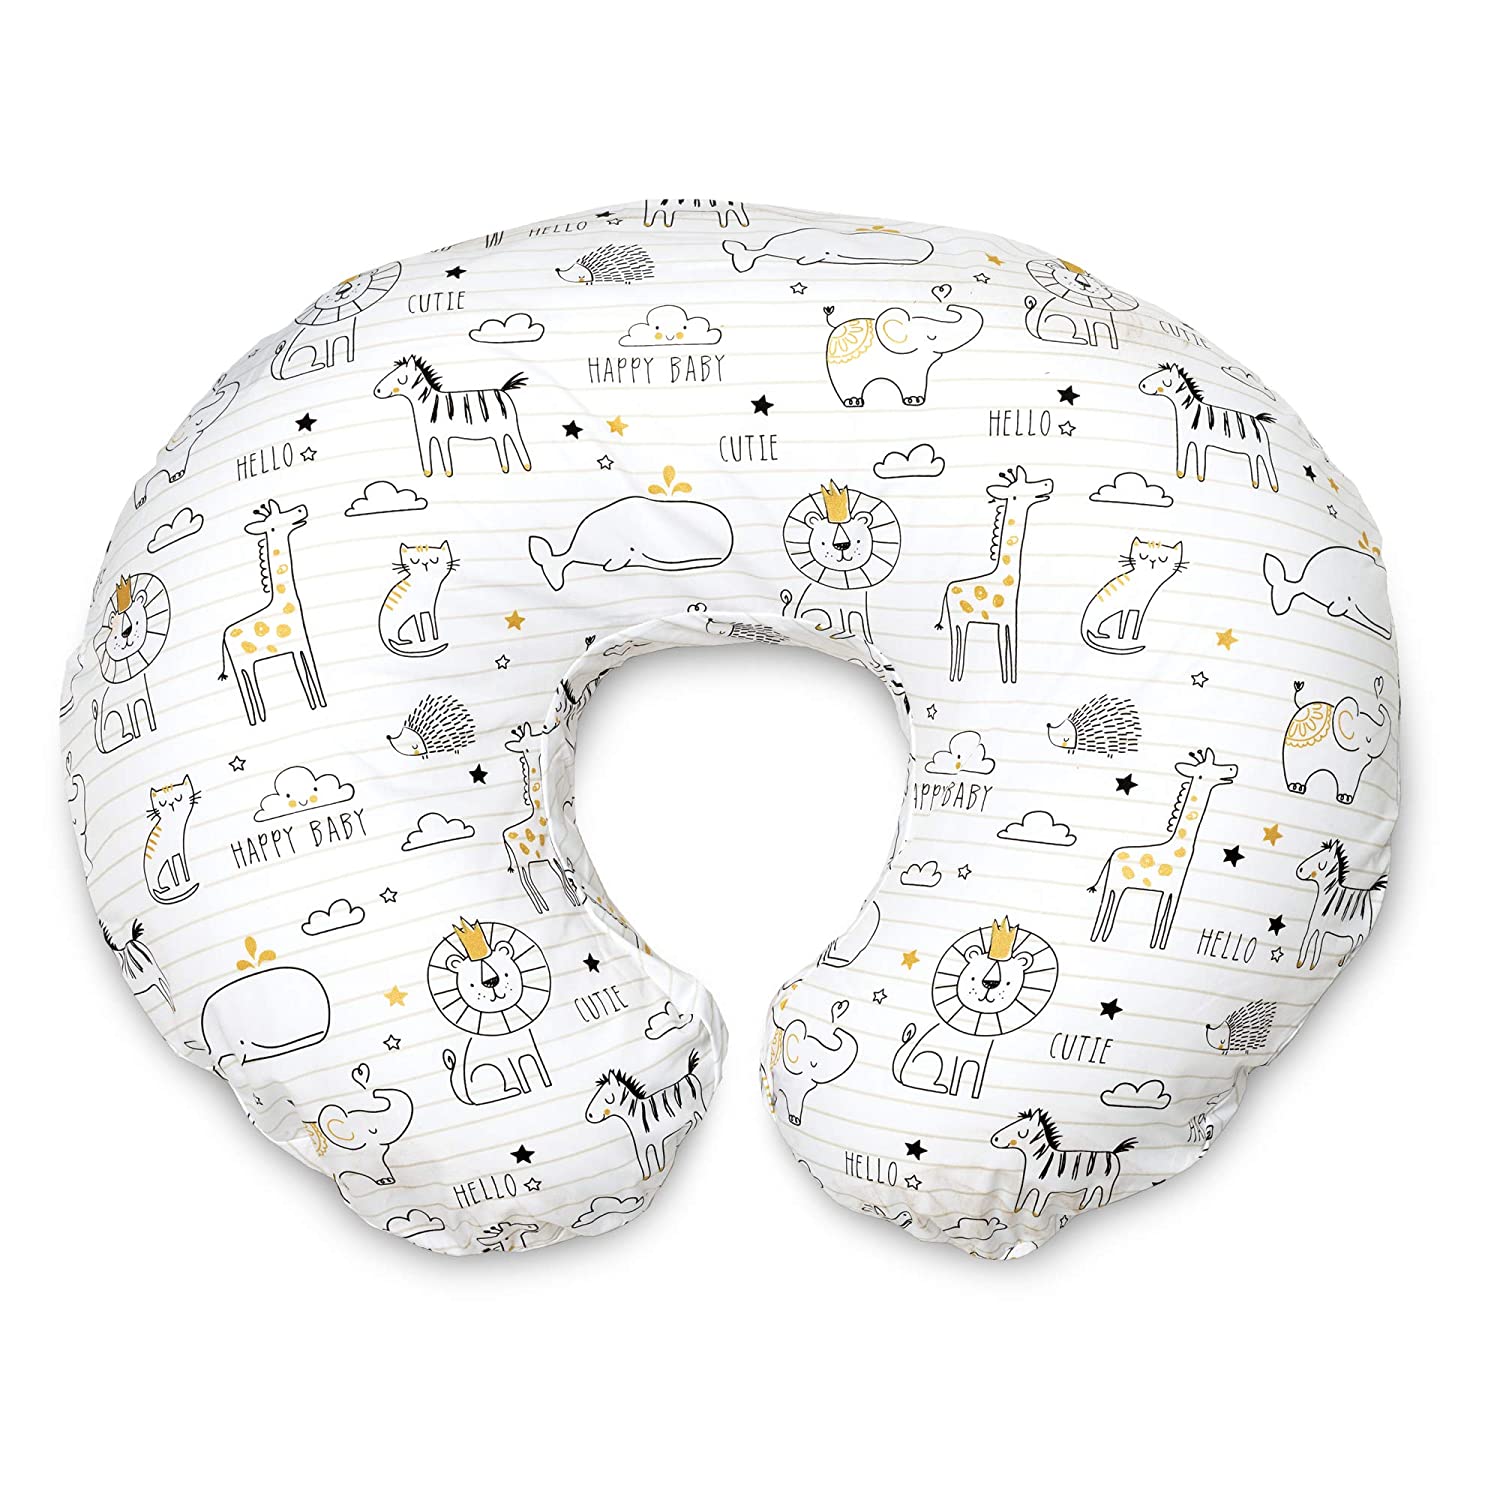 Boppy Nursing Pillow and Positioner - Original, Notebook Black and White with Gold Animals, Breastfeeding, Bottle Feeding, Baby Support, with Removable Cotton Blend Cover, Awake-Time Support